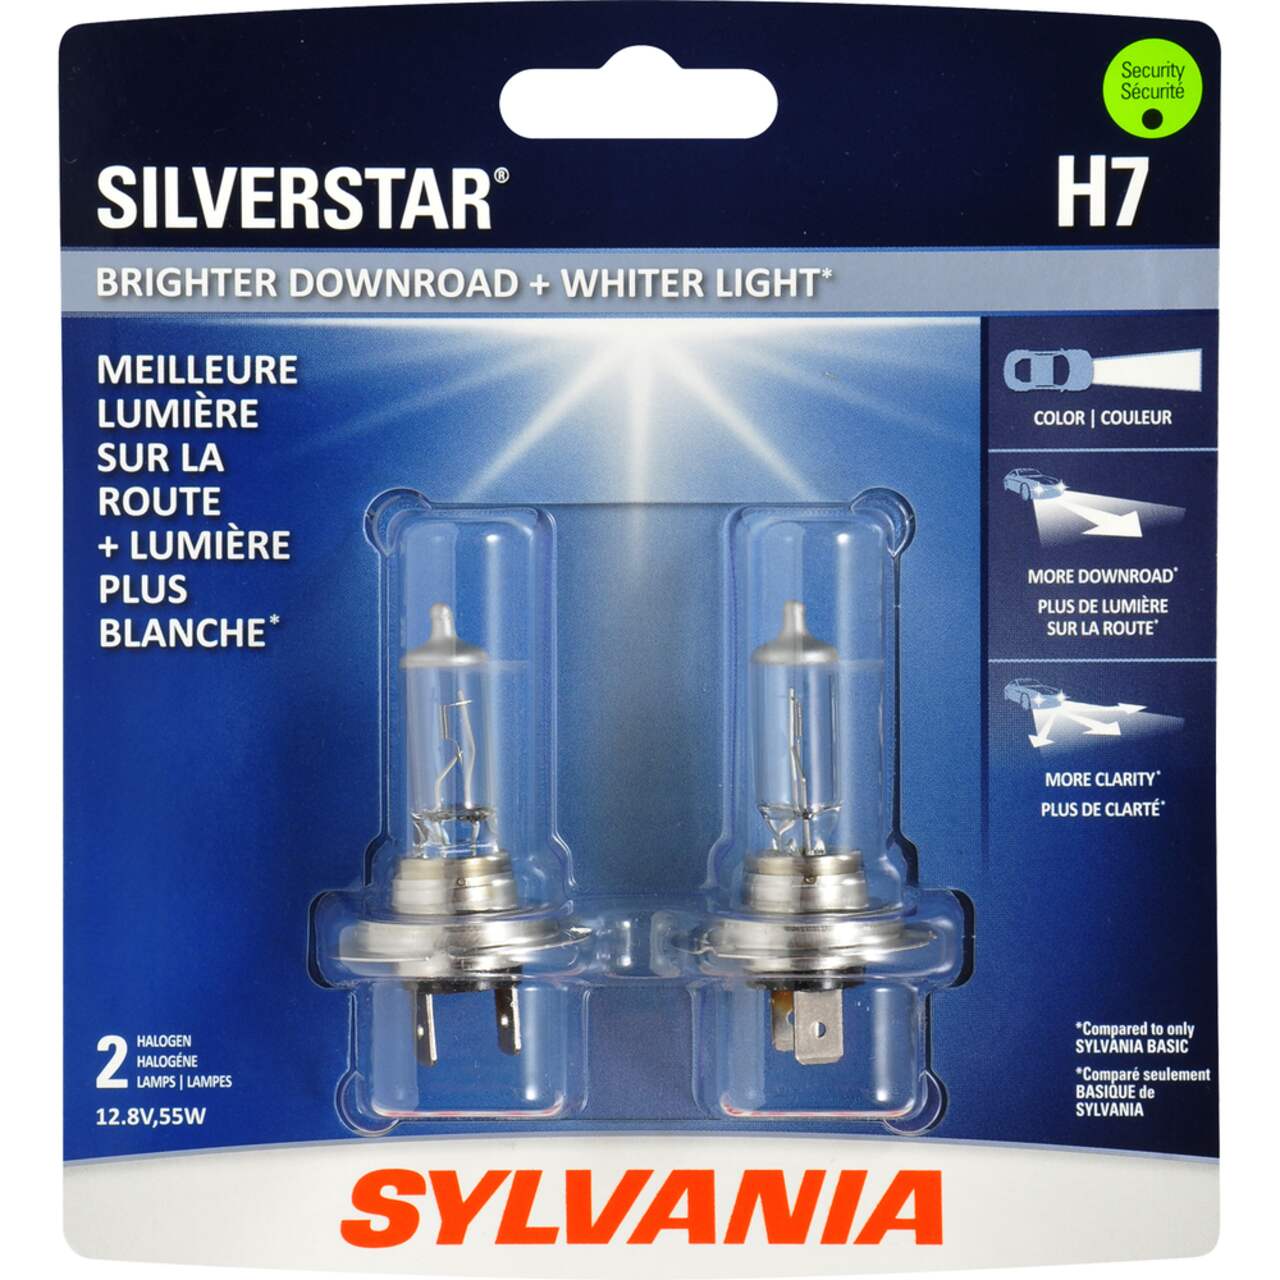 https://media-www.canadiantire.ca/product/automotive/auto-maintenance/auto-lighting/0202884/h7-siverstar-halogen-bulbs-2-pk-8731e2f9-2c00-4d28-992c-08d6d888dc6a.png?imdensity=1&imwidth=640&impolicy=mZoom